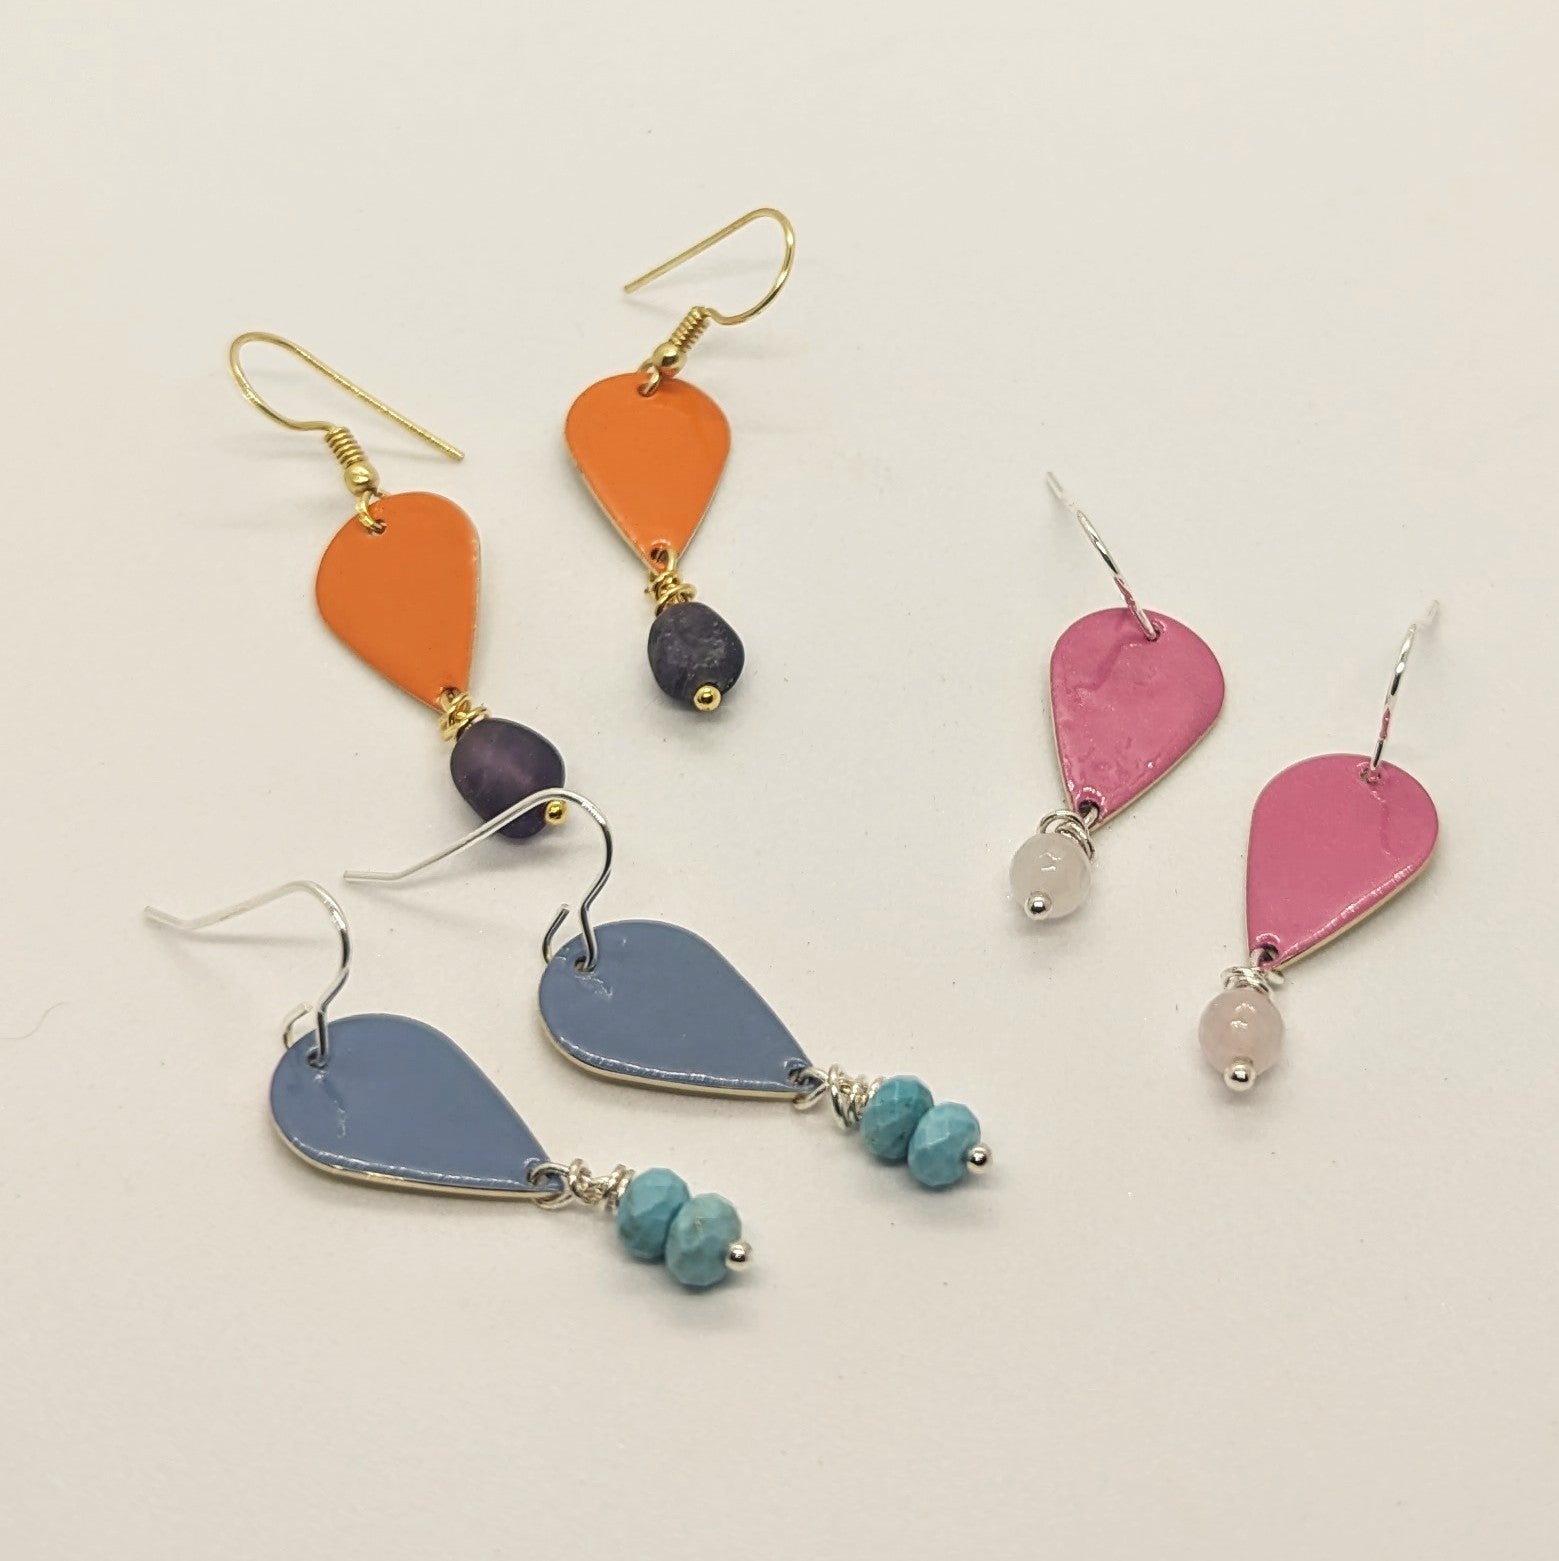 A selection of three pairs or colourful, everyday wear earrings embellished with healing crystals.  colours and crystal pairs included: Orange with Amethyst, Blue with Turquoise, Pink with Rose Quartz  